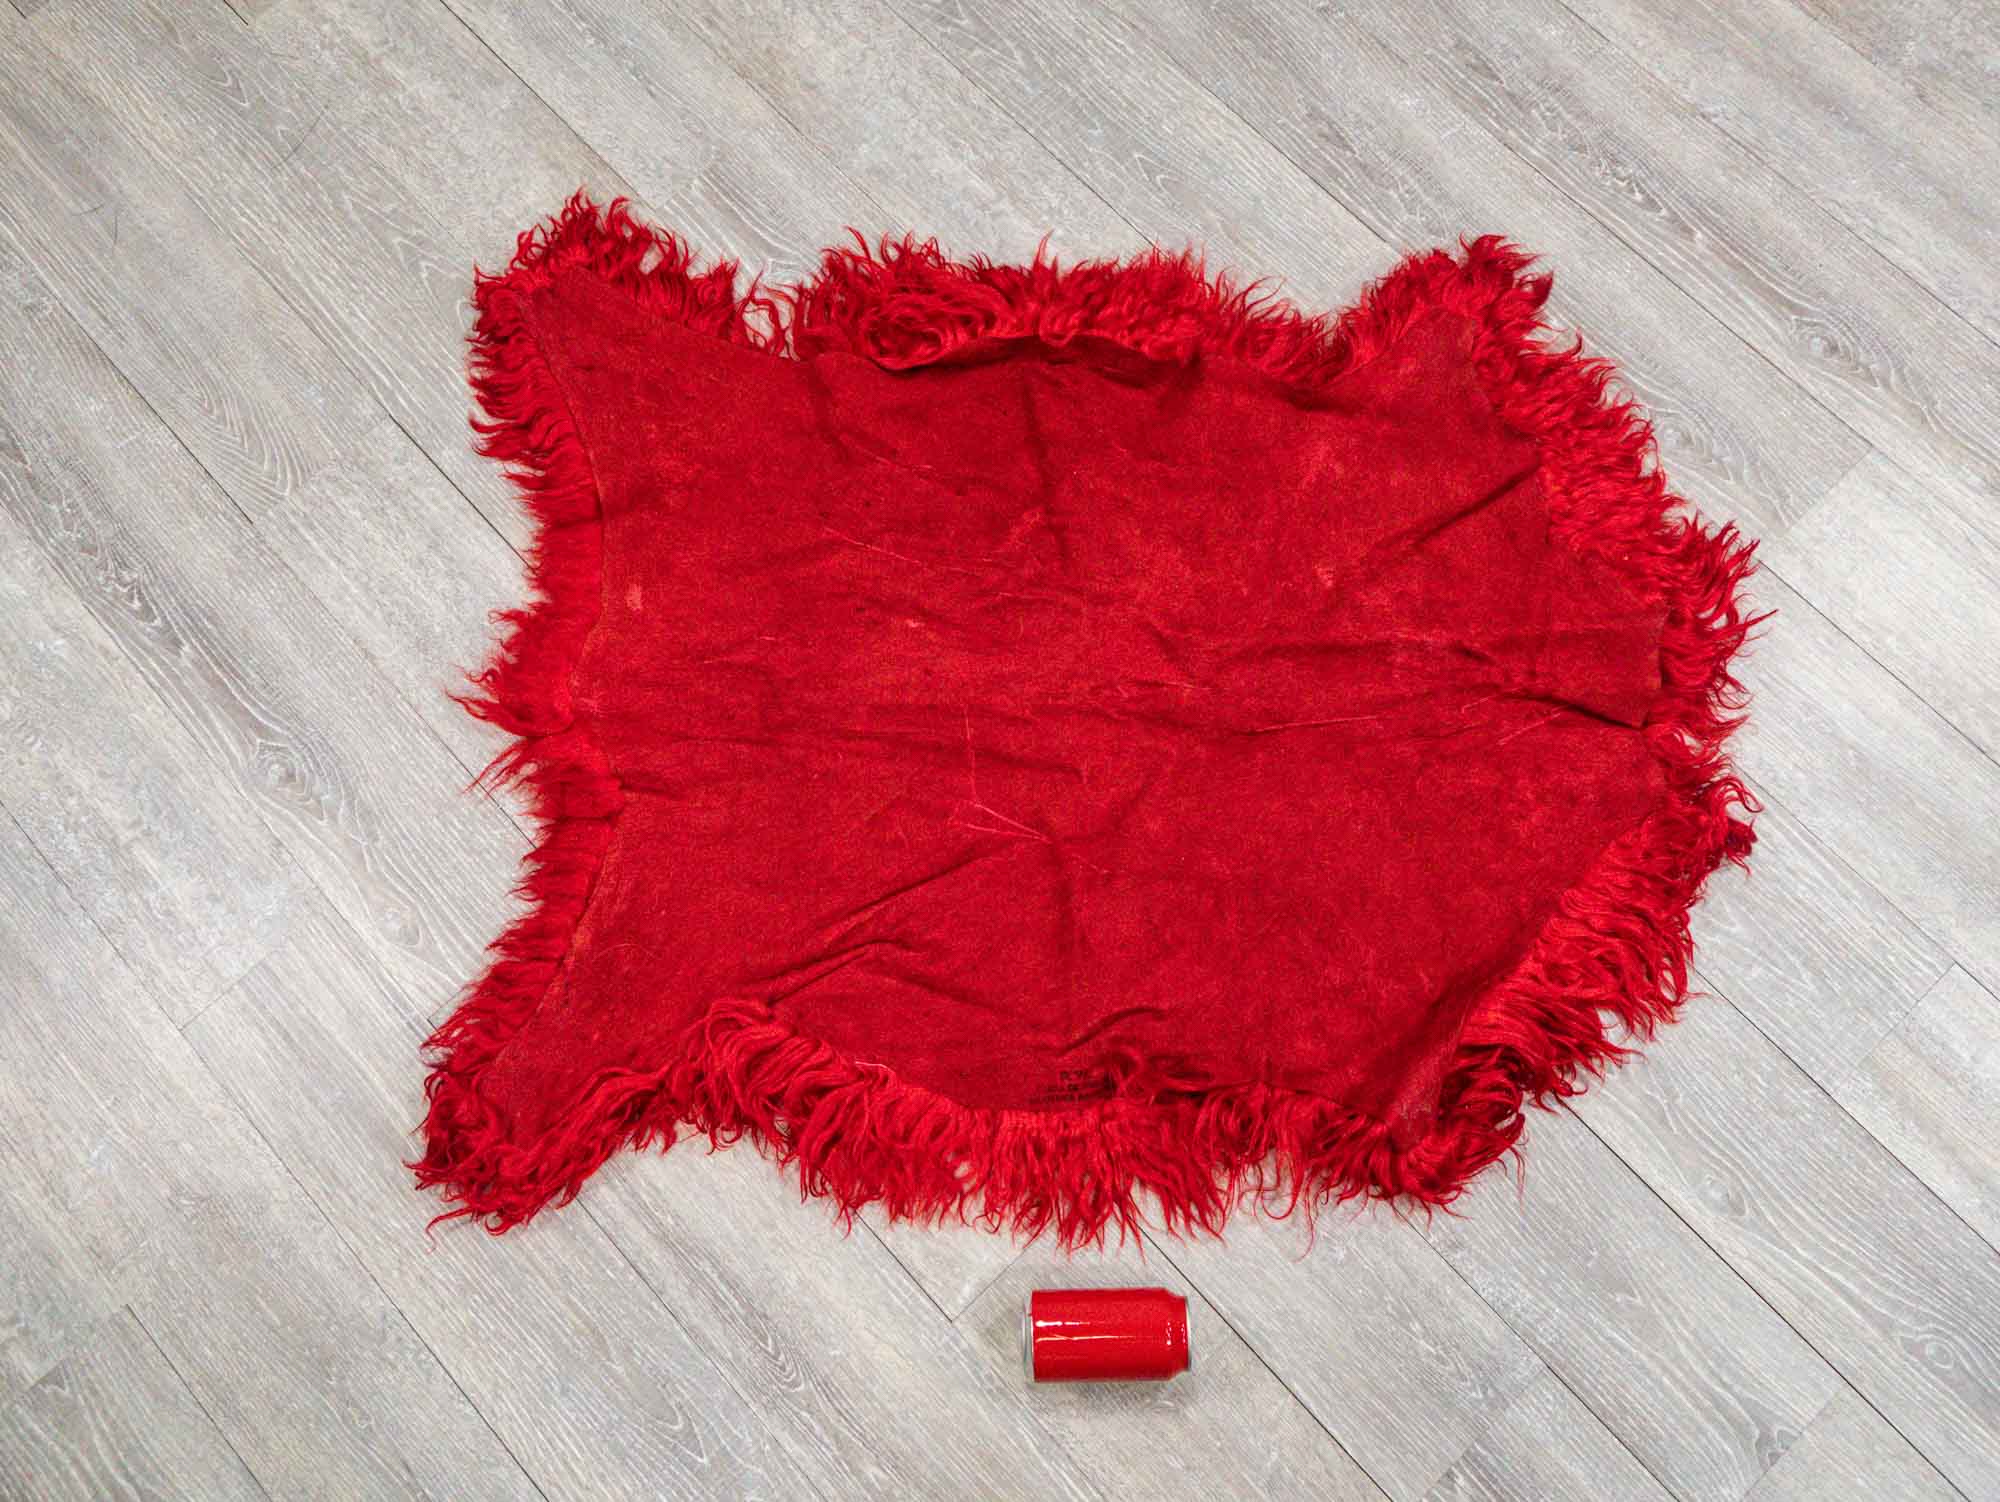 Dyed Angora Goatskin: #1: Extra Large: Red: Gallery Item - 66-A1XL-RD-G4980 (10UB06)